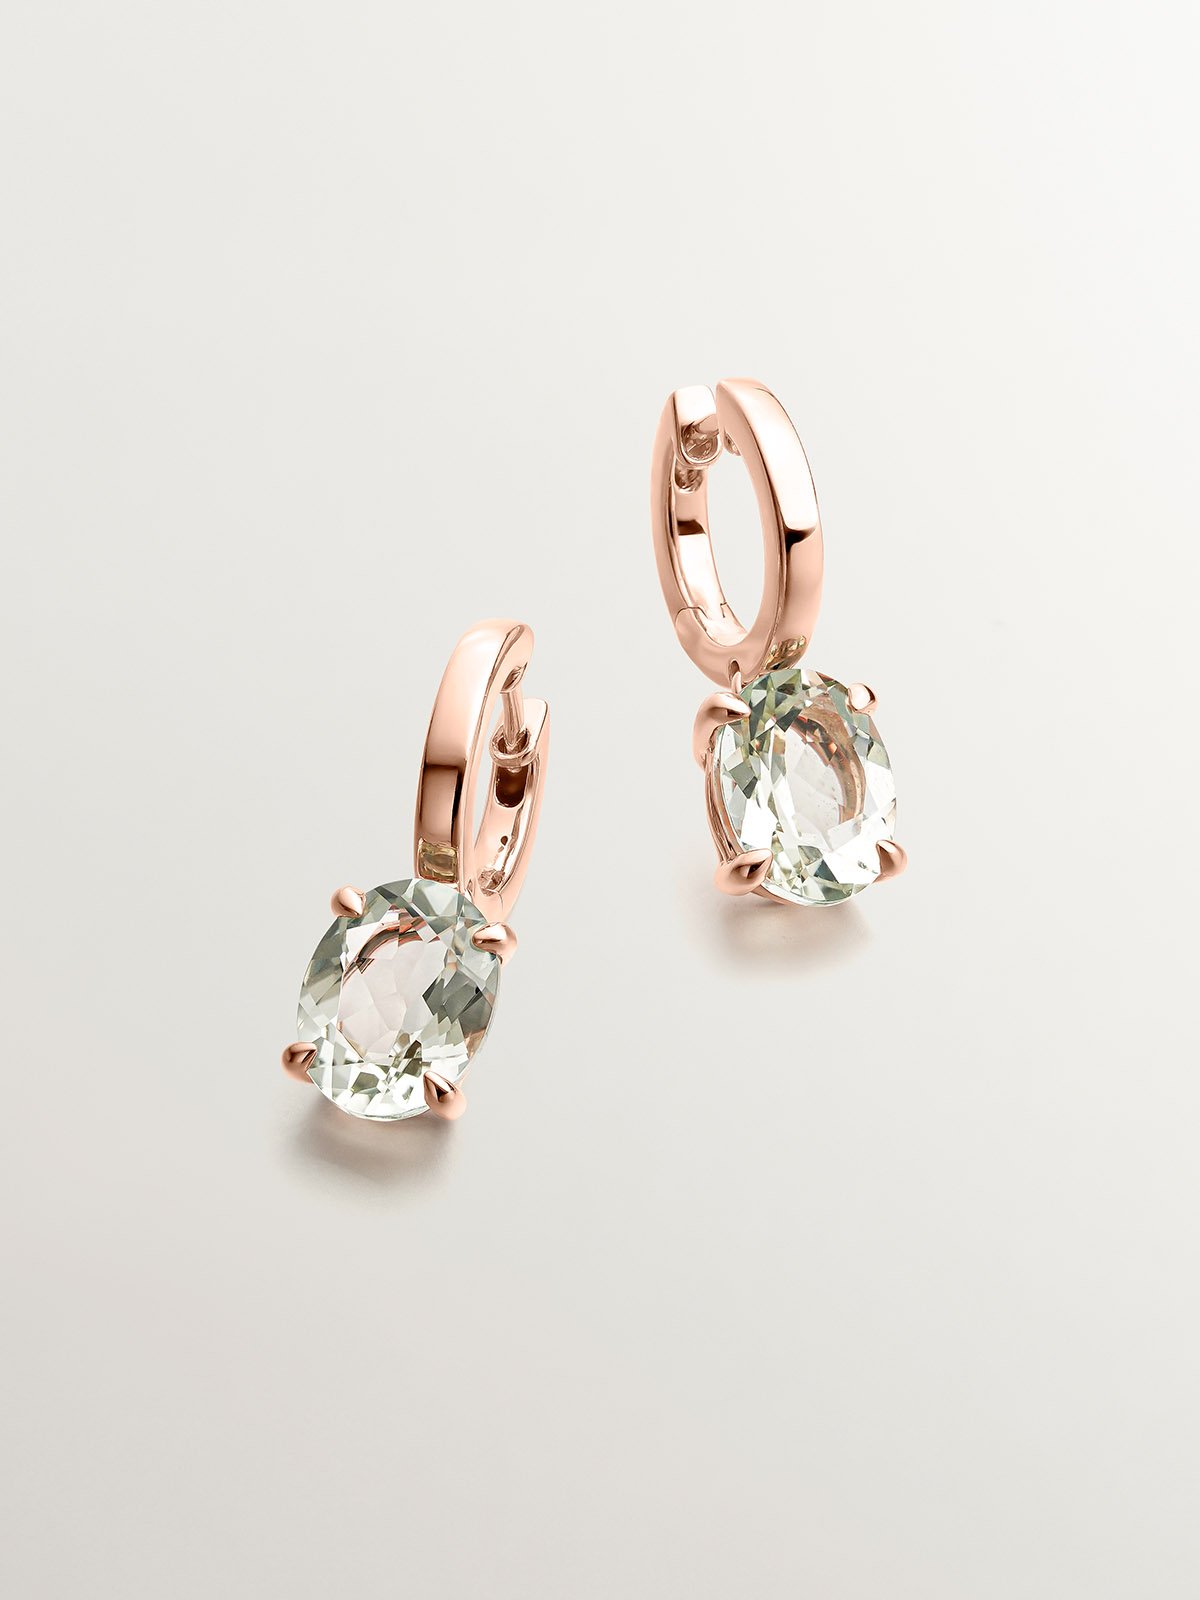 Medium-sized 925 silver hoop earrings bathed in 18K rose gold with green quartz.